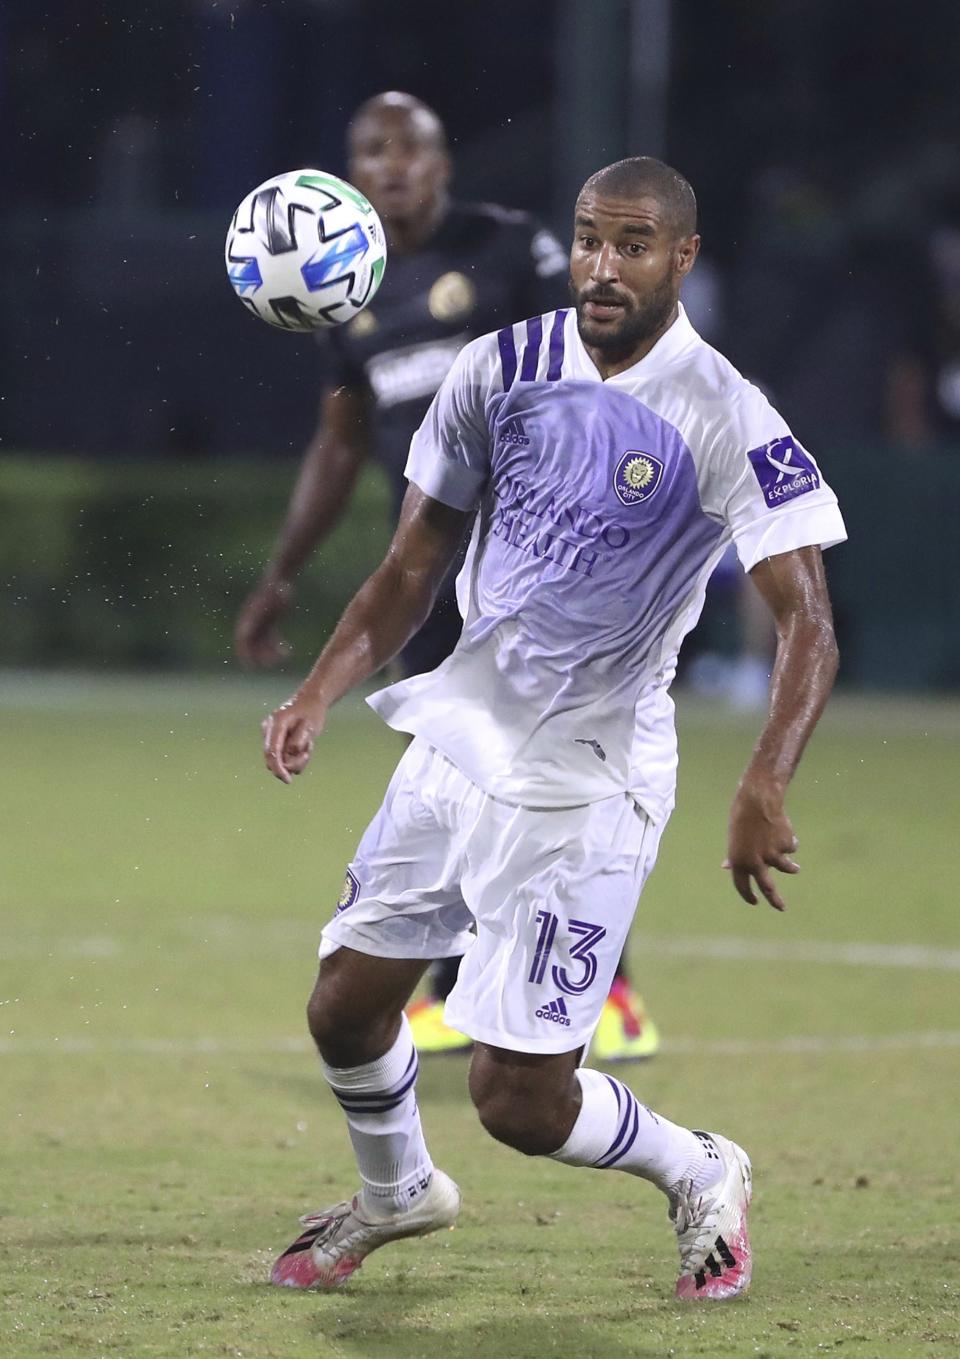 Orlando City's Tesho Akindele controls the ball during an MLS Is Back tournament soccer game against the Philadelphia Union in Orlando, Fla., Monday, July 20, 2020. (Stephen M. Dowell/Orlando Sentinel via AP)